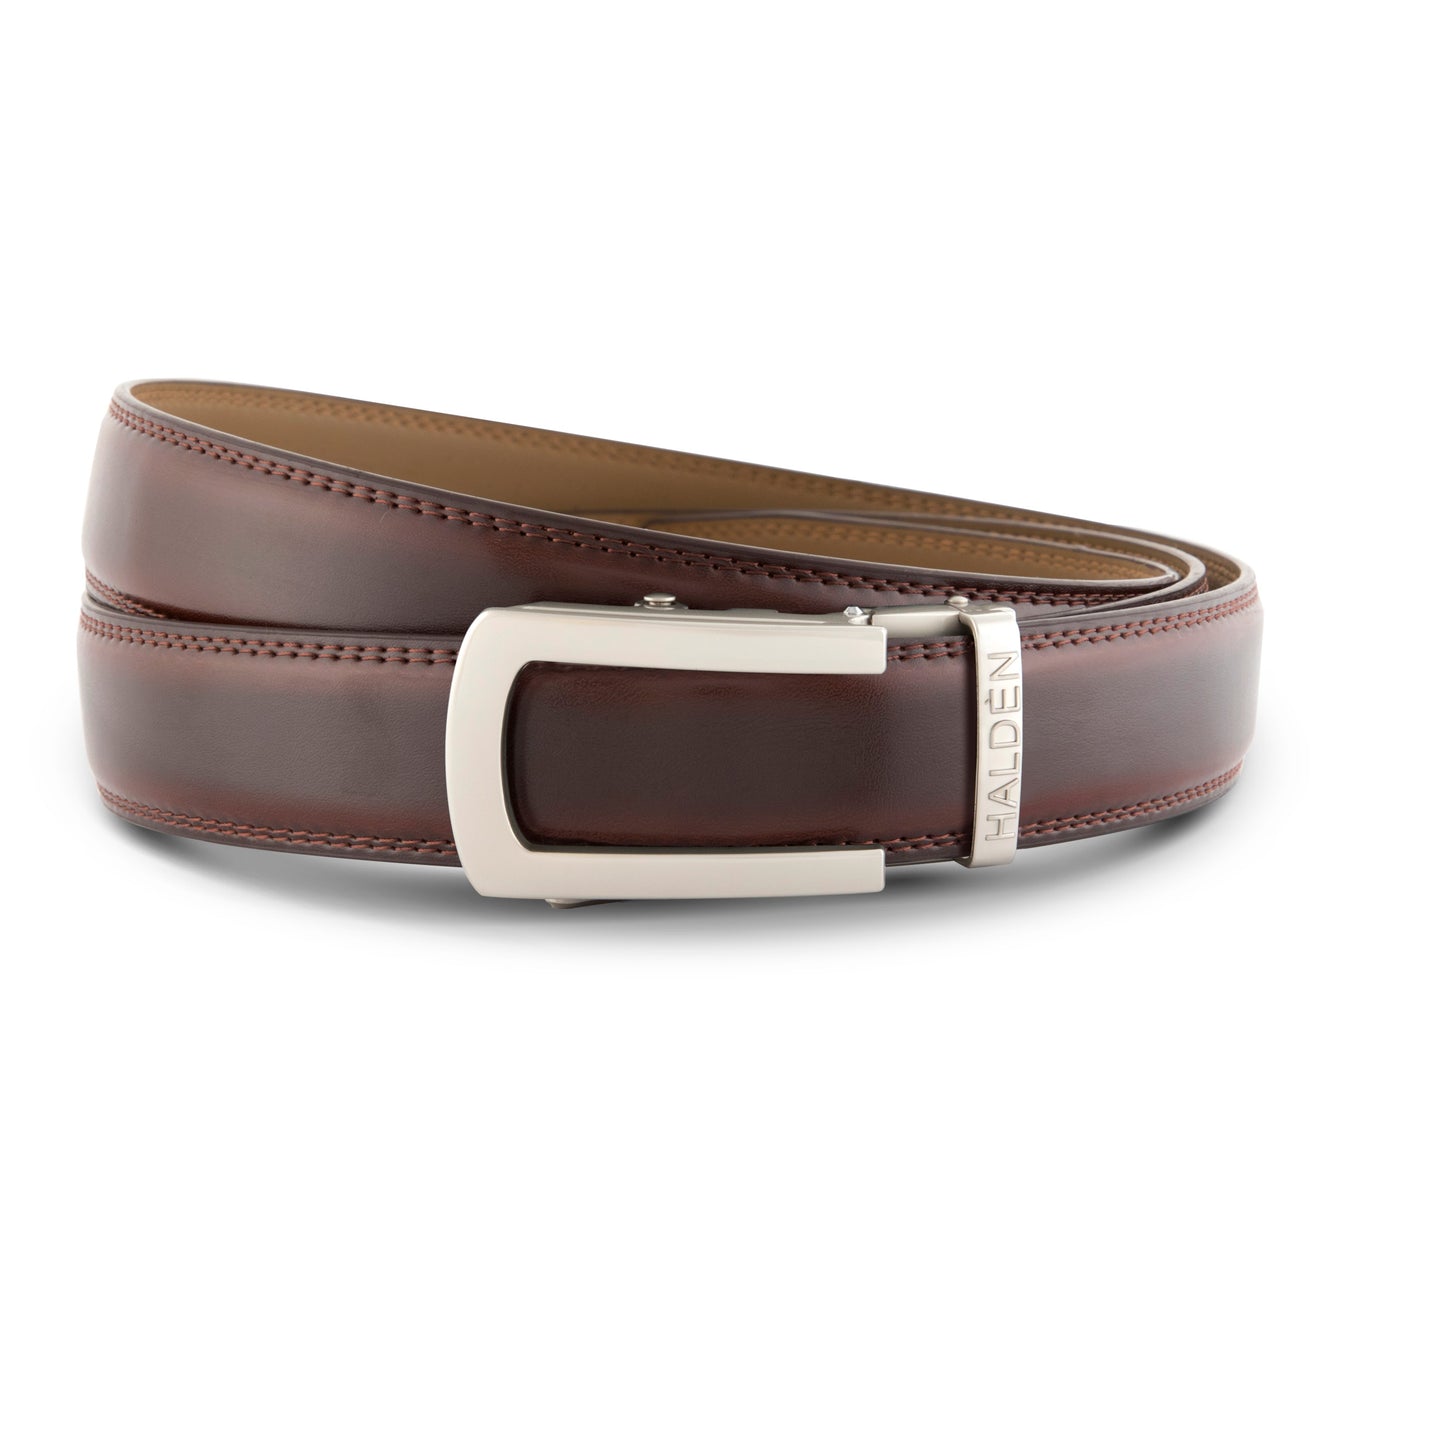 Burley coffee brown with classic buckle